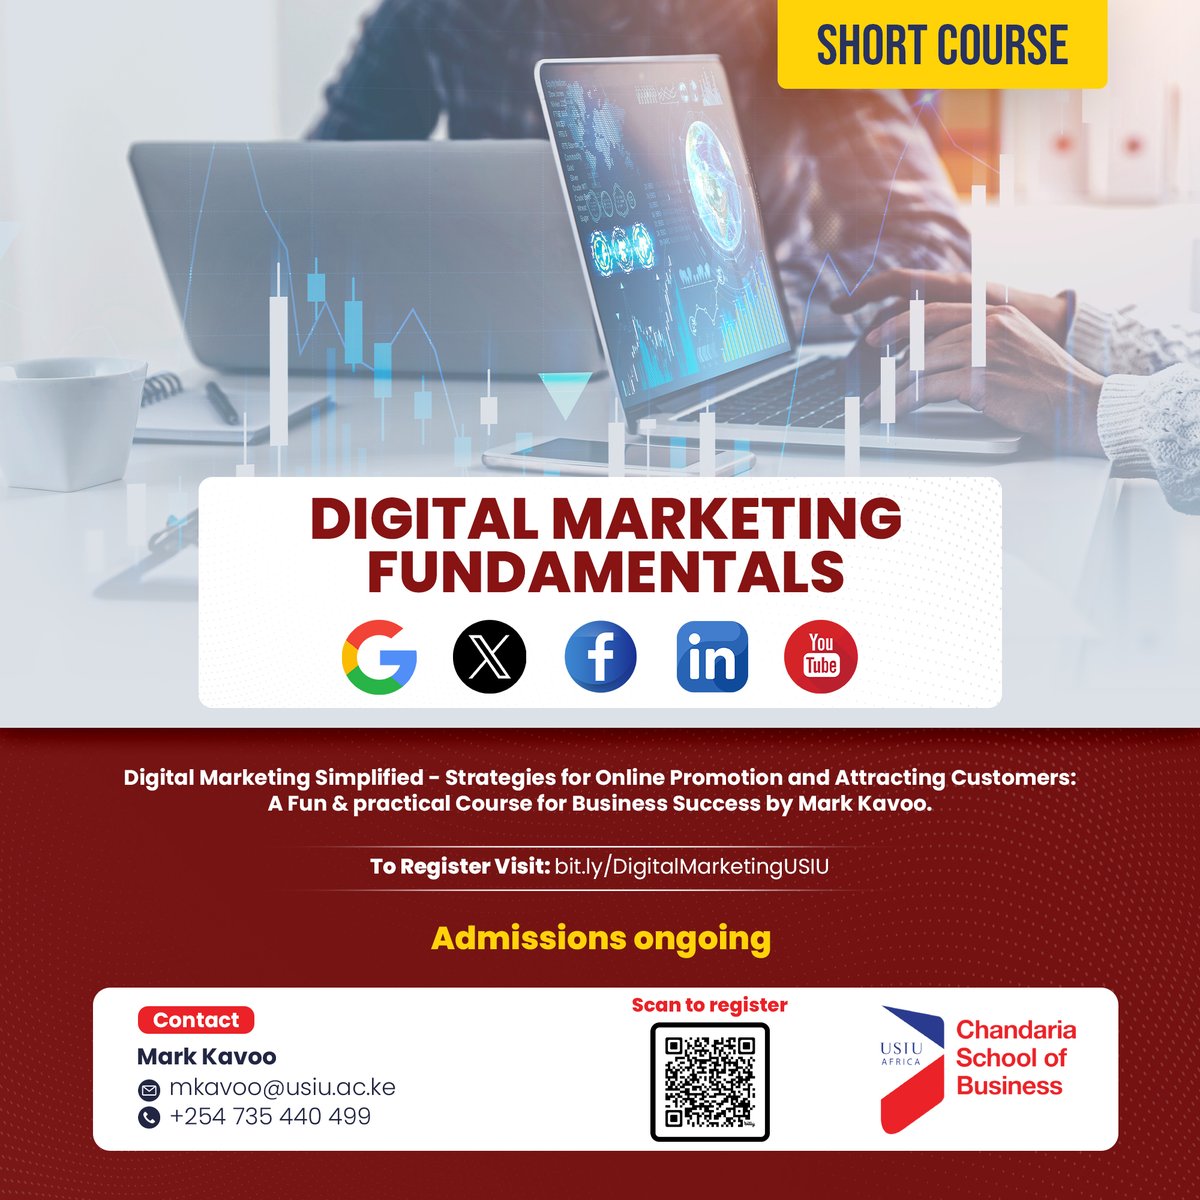 📢 Calling out on all aspiring marketers! Want to unlock the secrets of digital success? Our DIGITAL MARKETING FUNDAMENTALS short course has got you covered! From SEO to social media, learn the essentials to thrive in today's digital age. To secure your spot for the ongoing